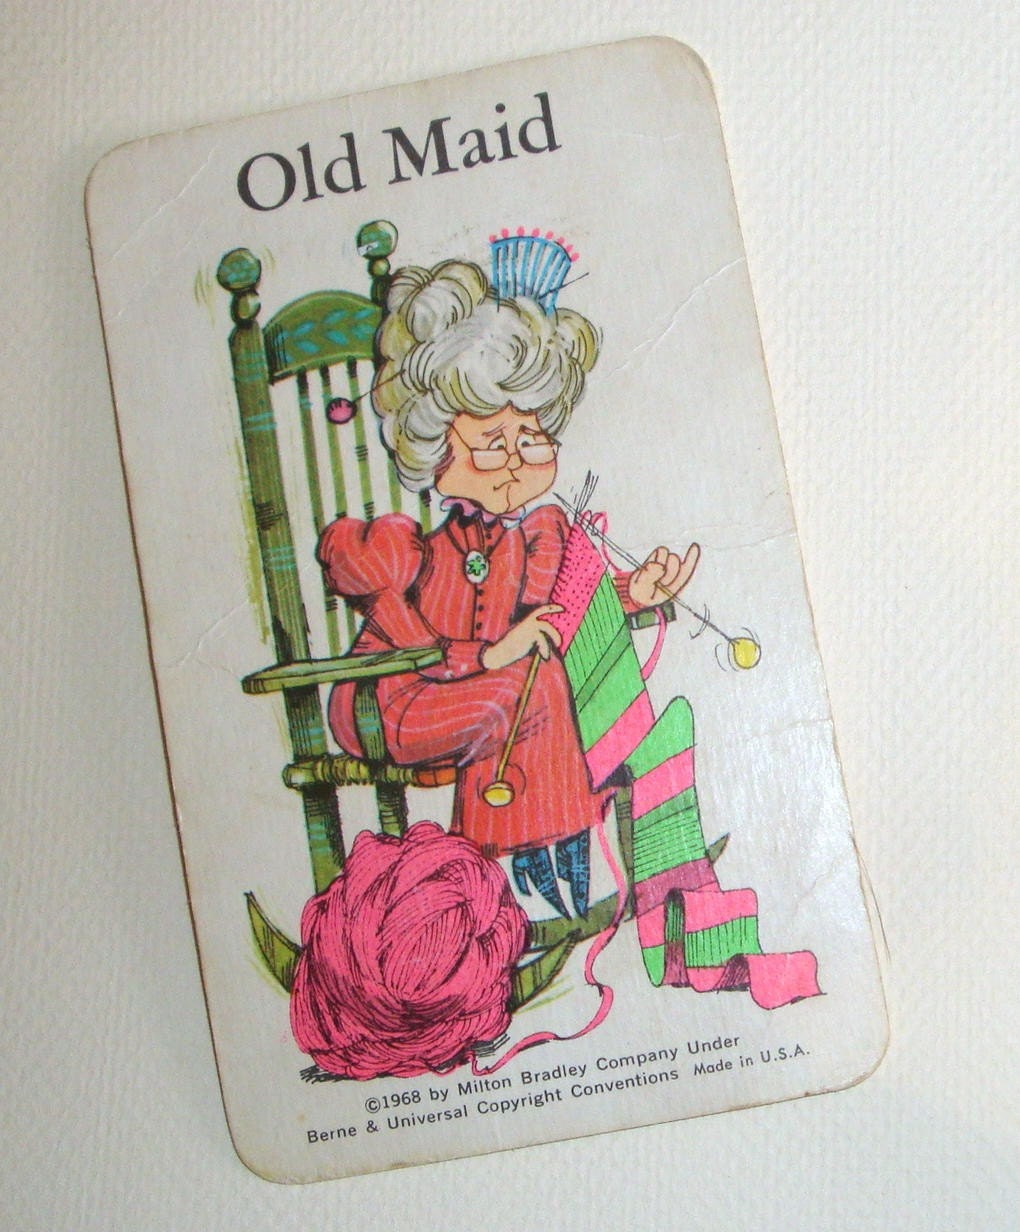 old-maid-cards-childhood-memories-retro-growing-up